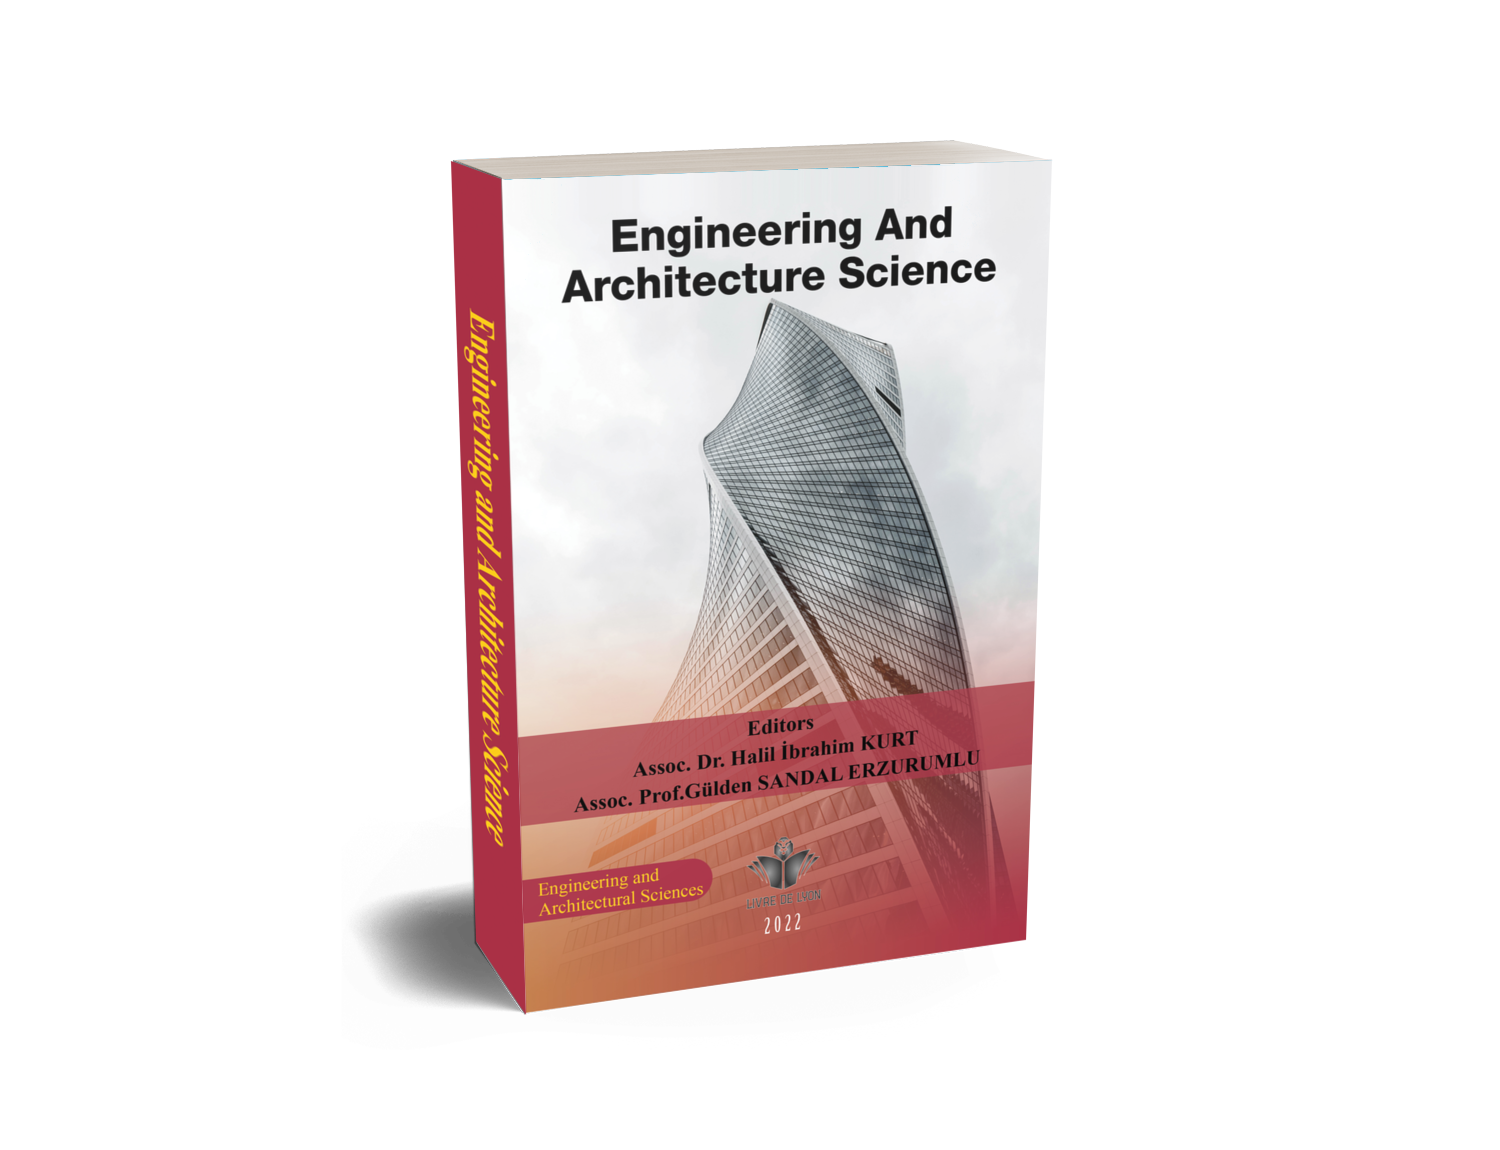 Engineering and Architecture Science